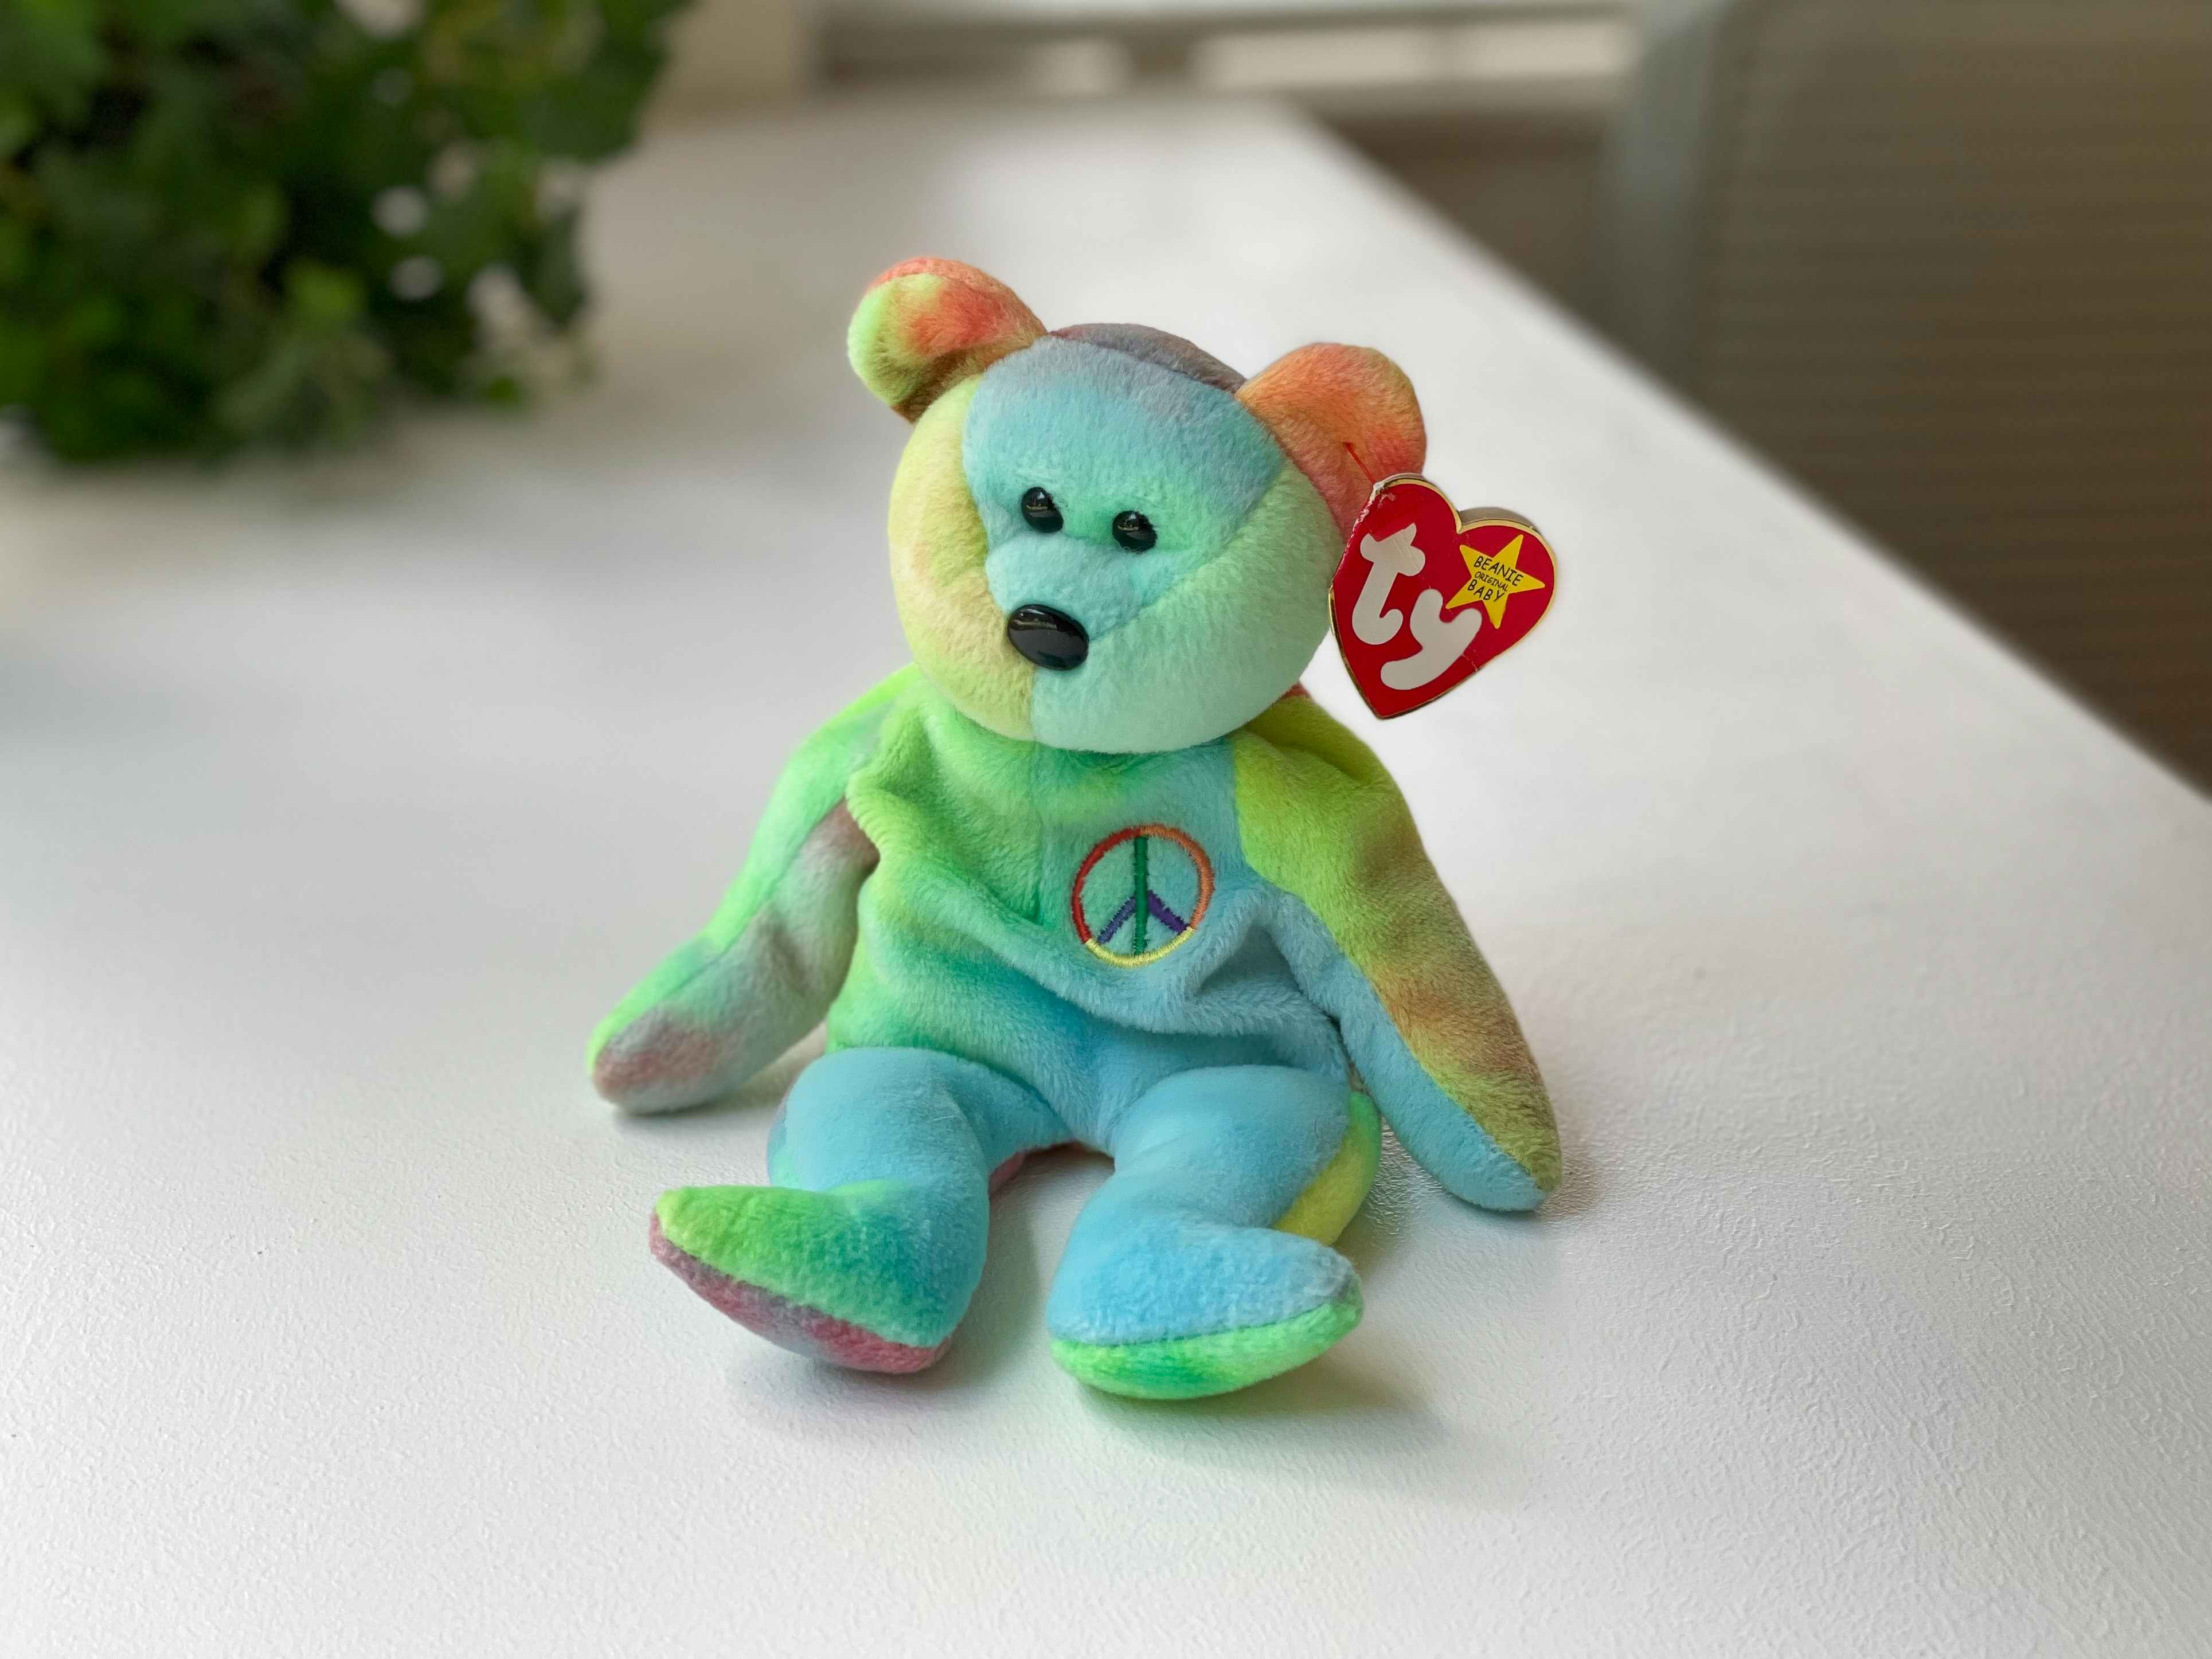 A Peace the Bear beanie baby sitting on a white table.